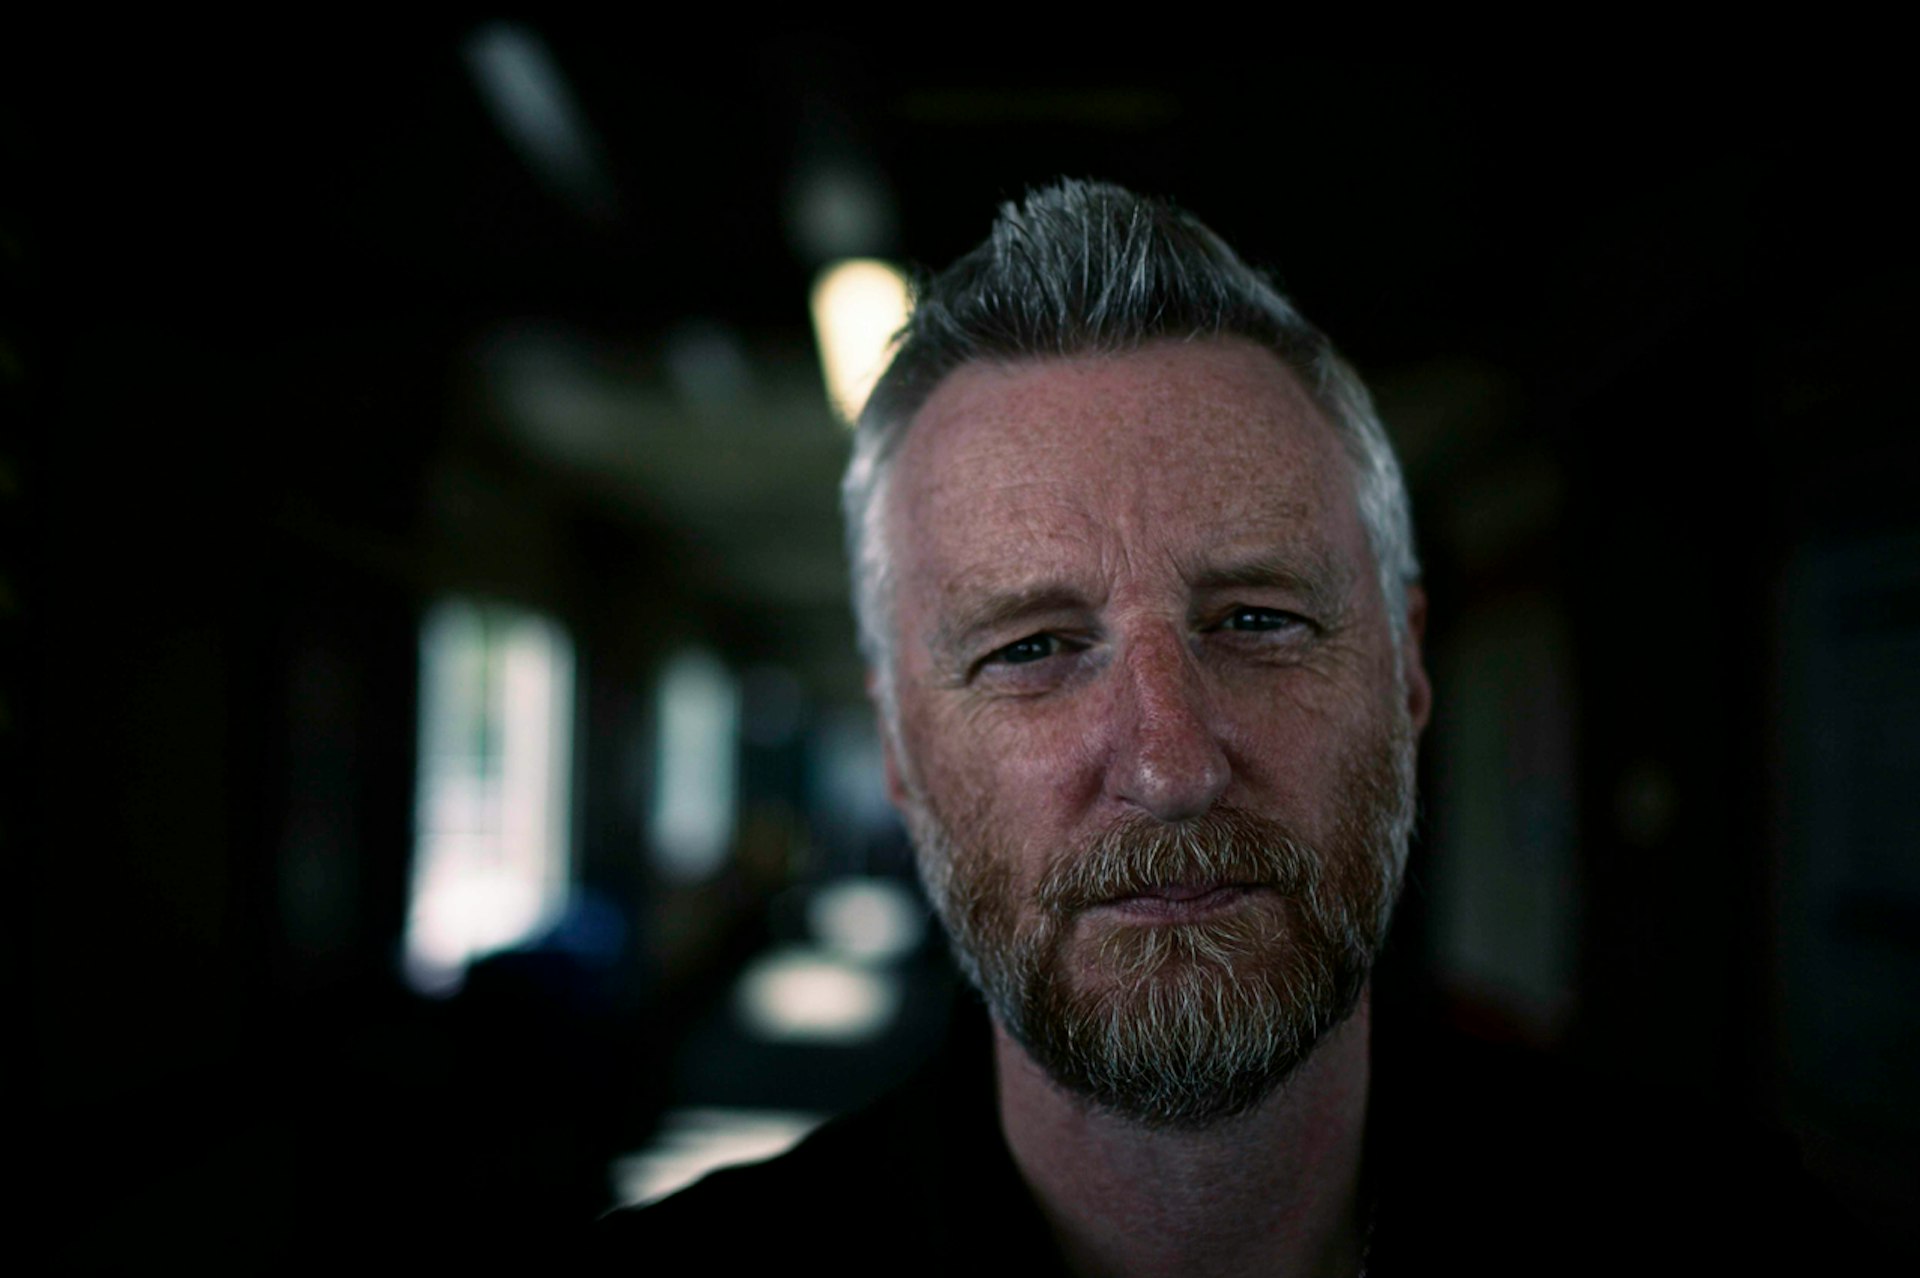 Five things we learnt from Billy Bragg’s Changing Britain talk